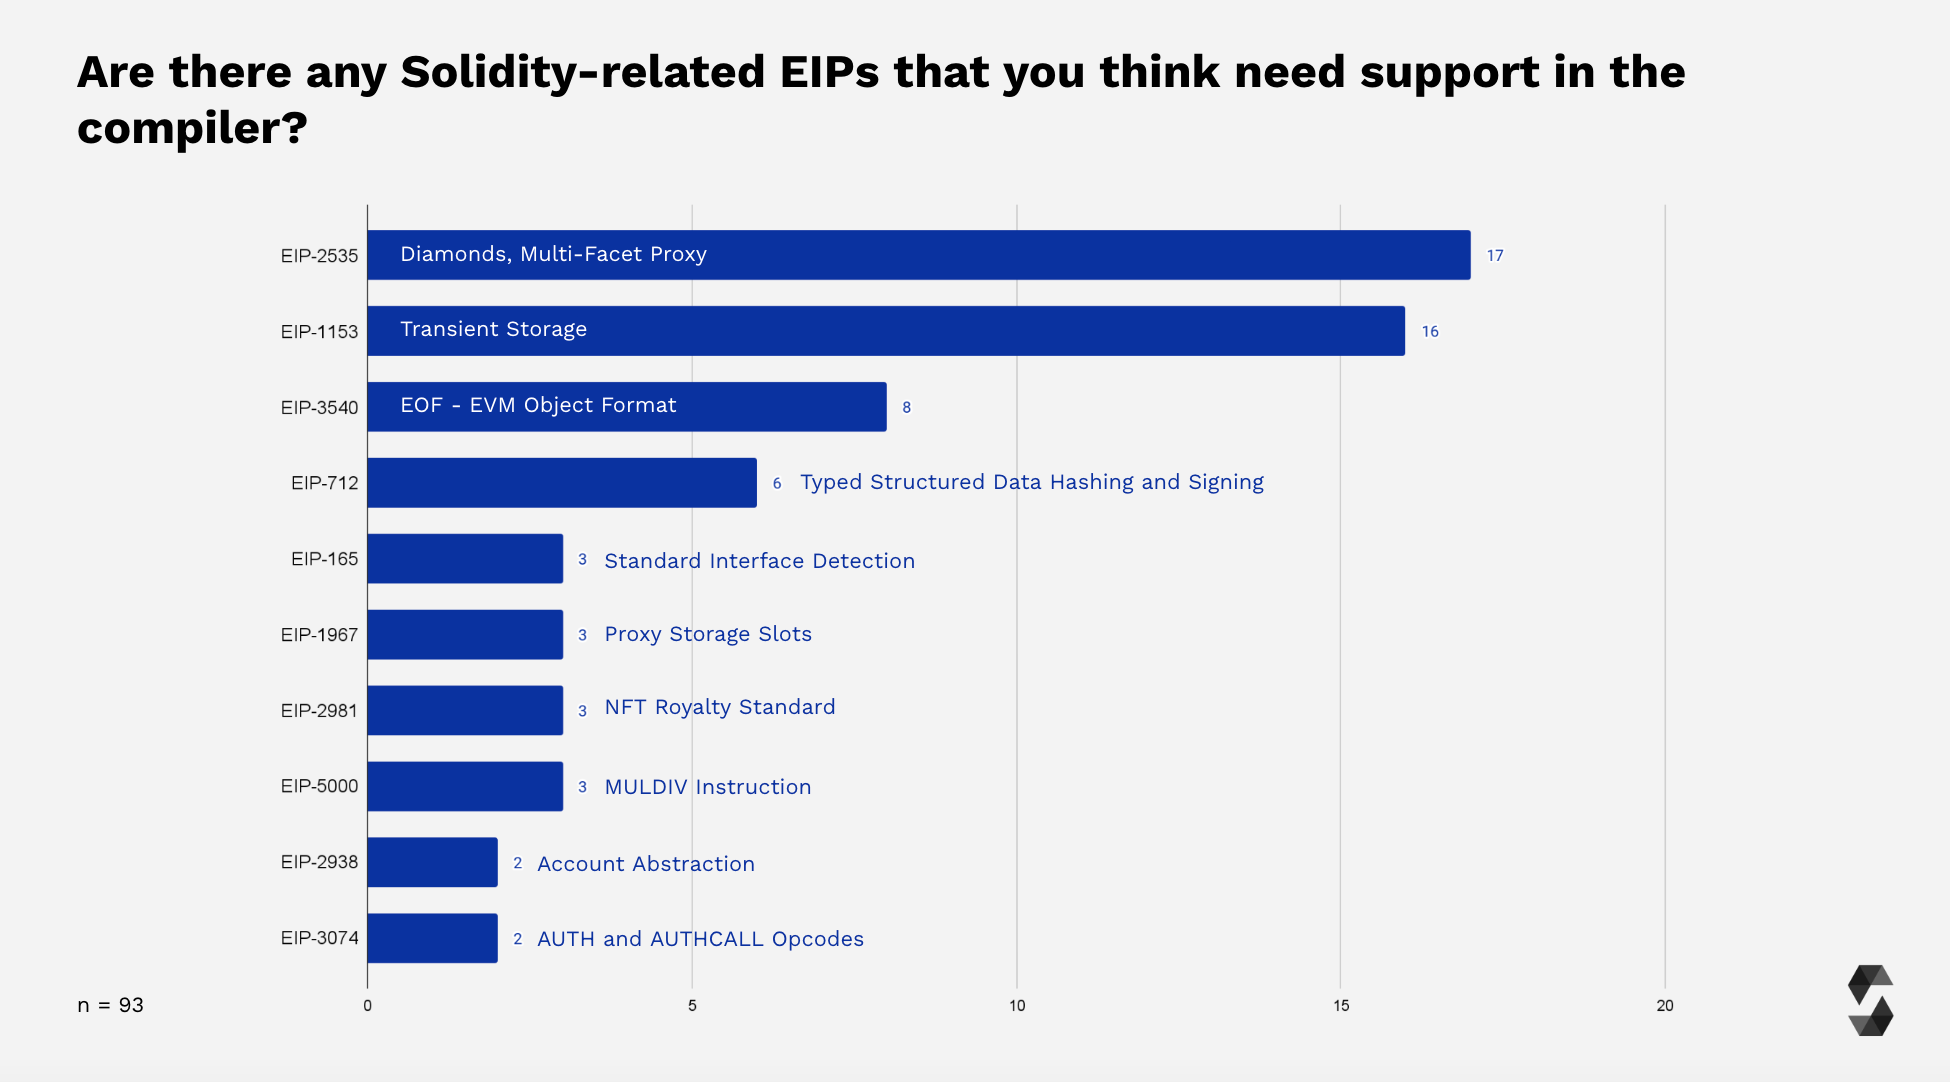 Solidity-related EIPs